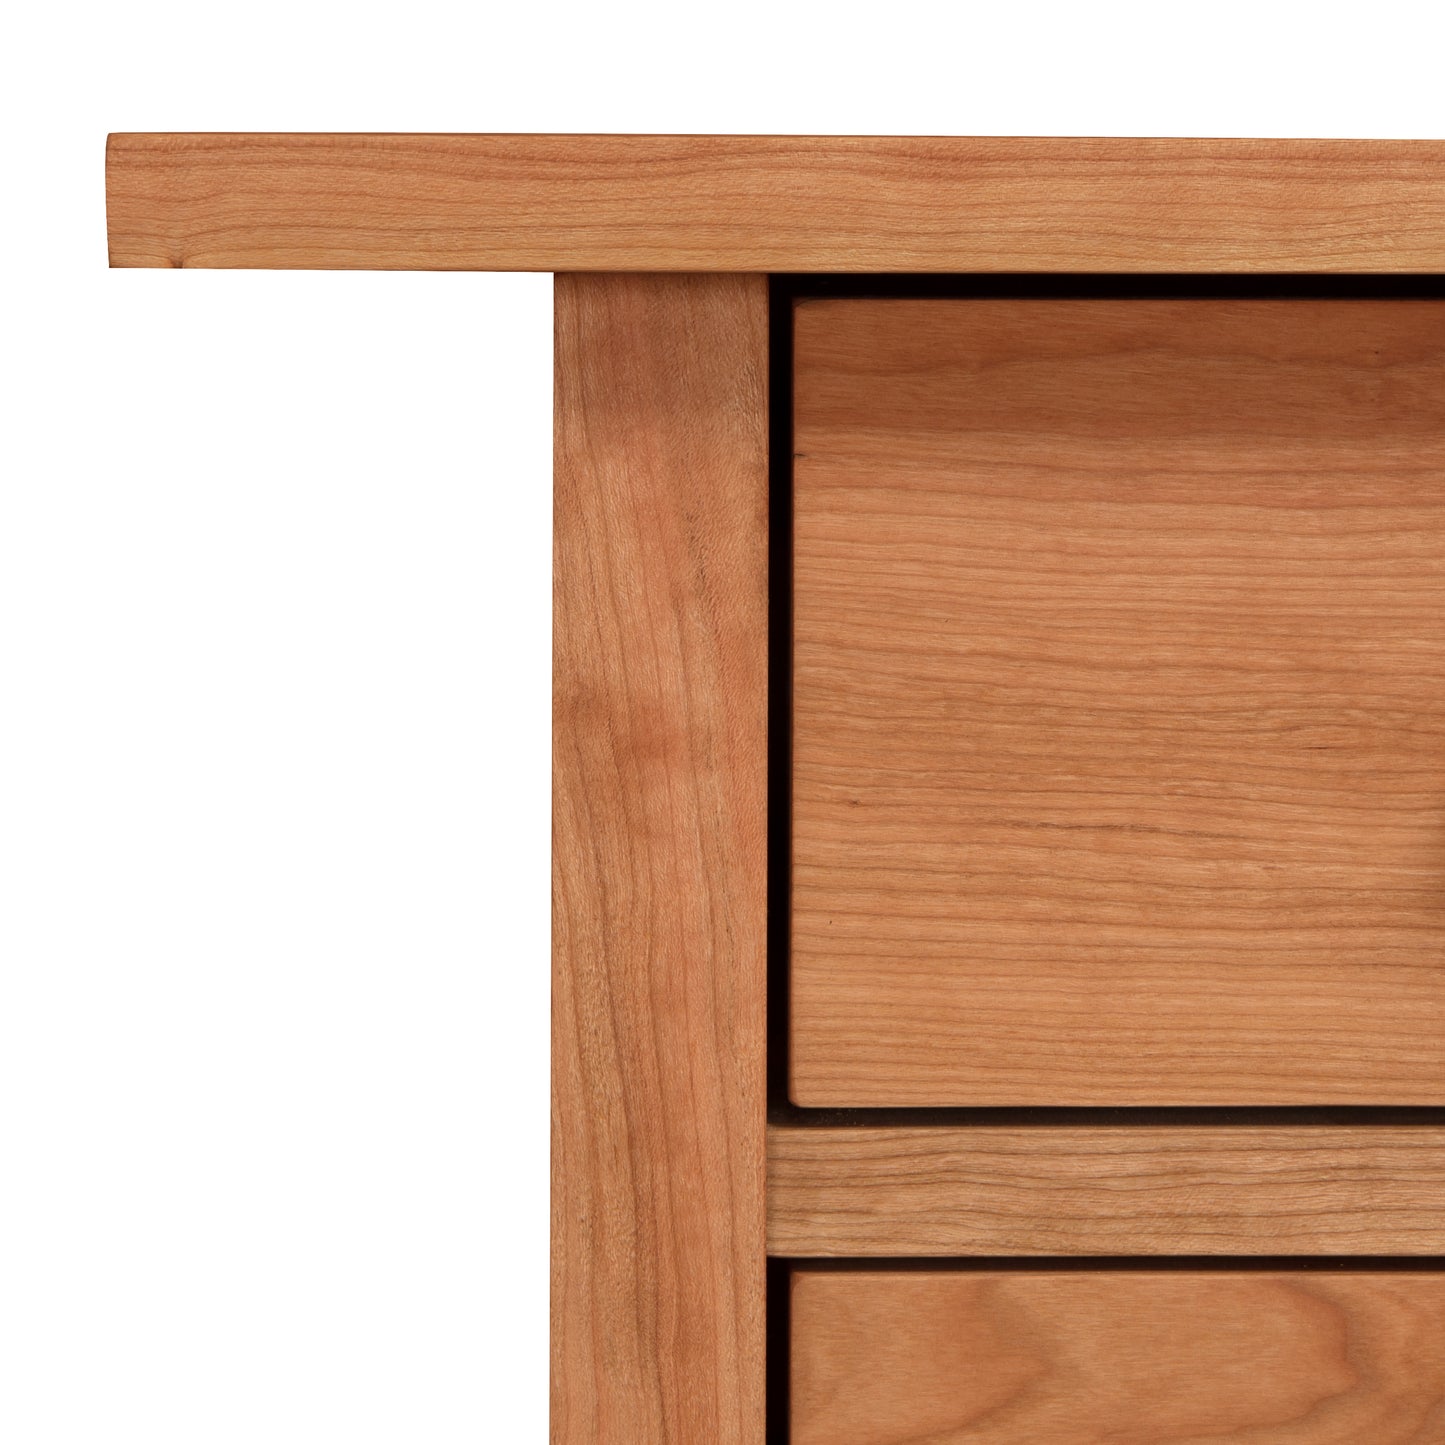 A Vermont Furniture Designs Modern Craftsman 3-Drawer Nightstand in a contemporary bedroom.